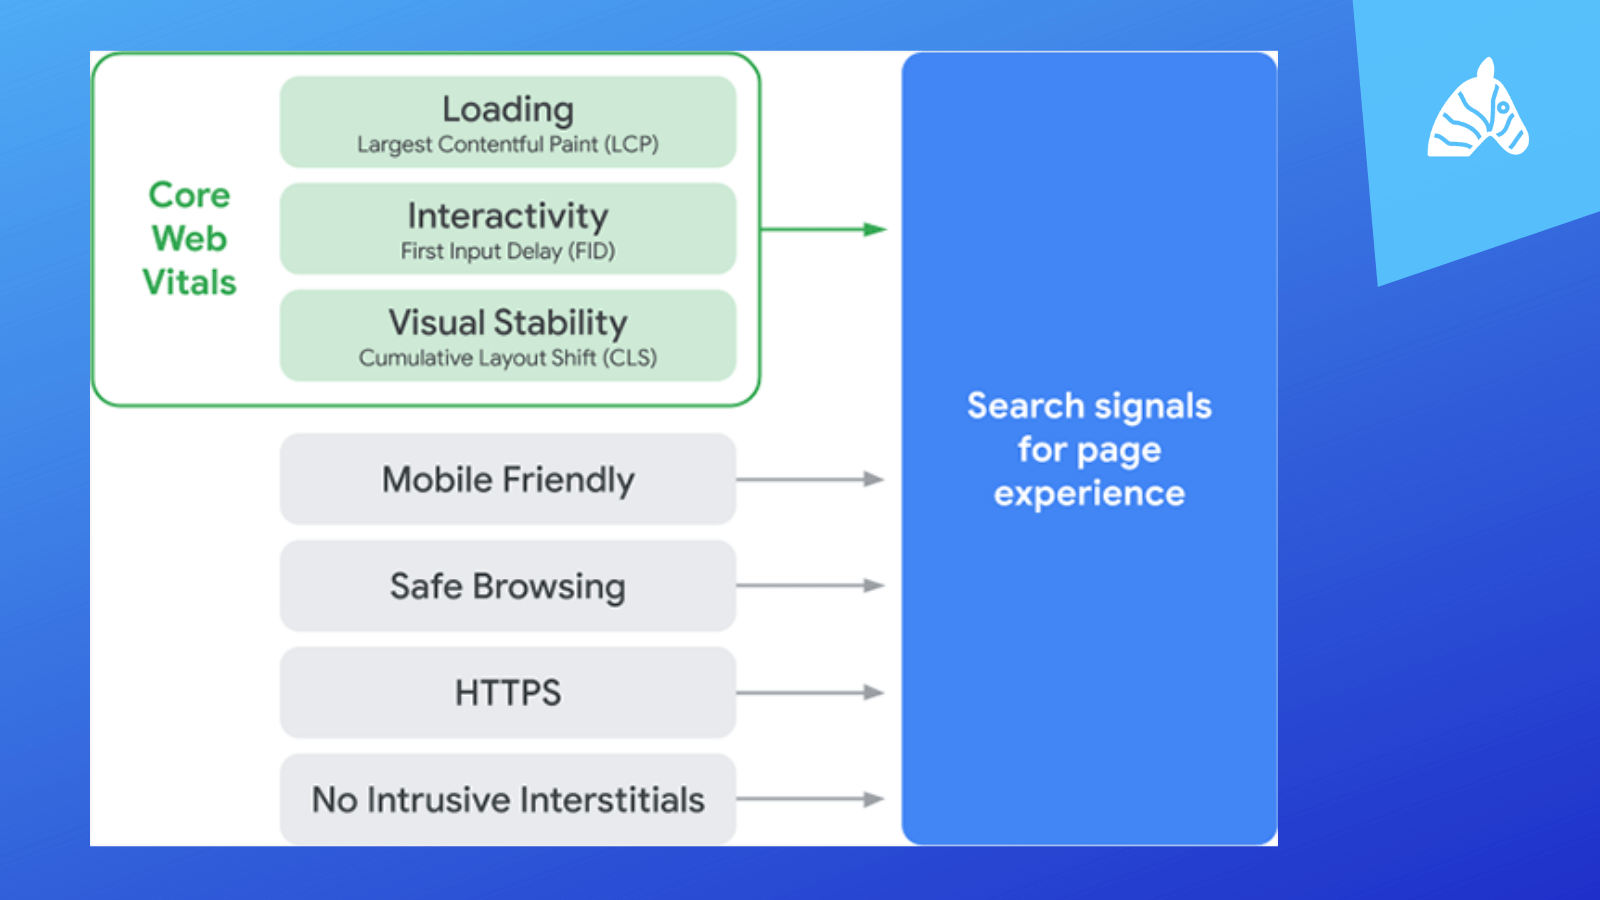 A breakdown of the Google page experience elements